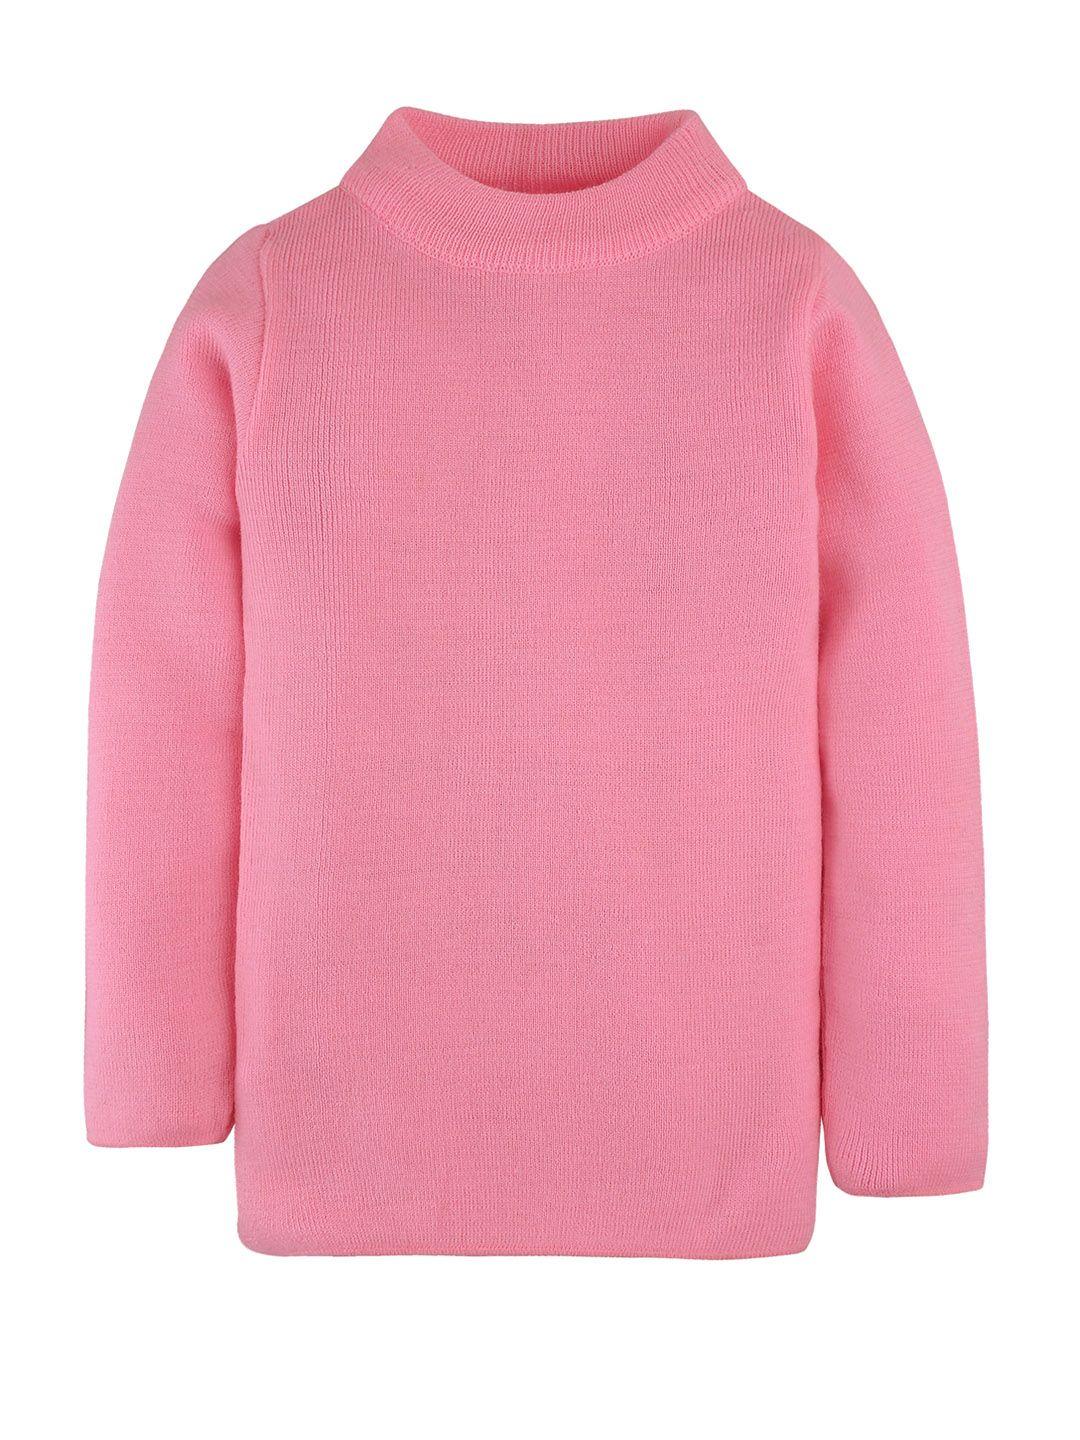 rvk kids pink solid pullover sweater